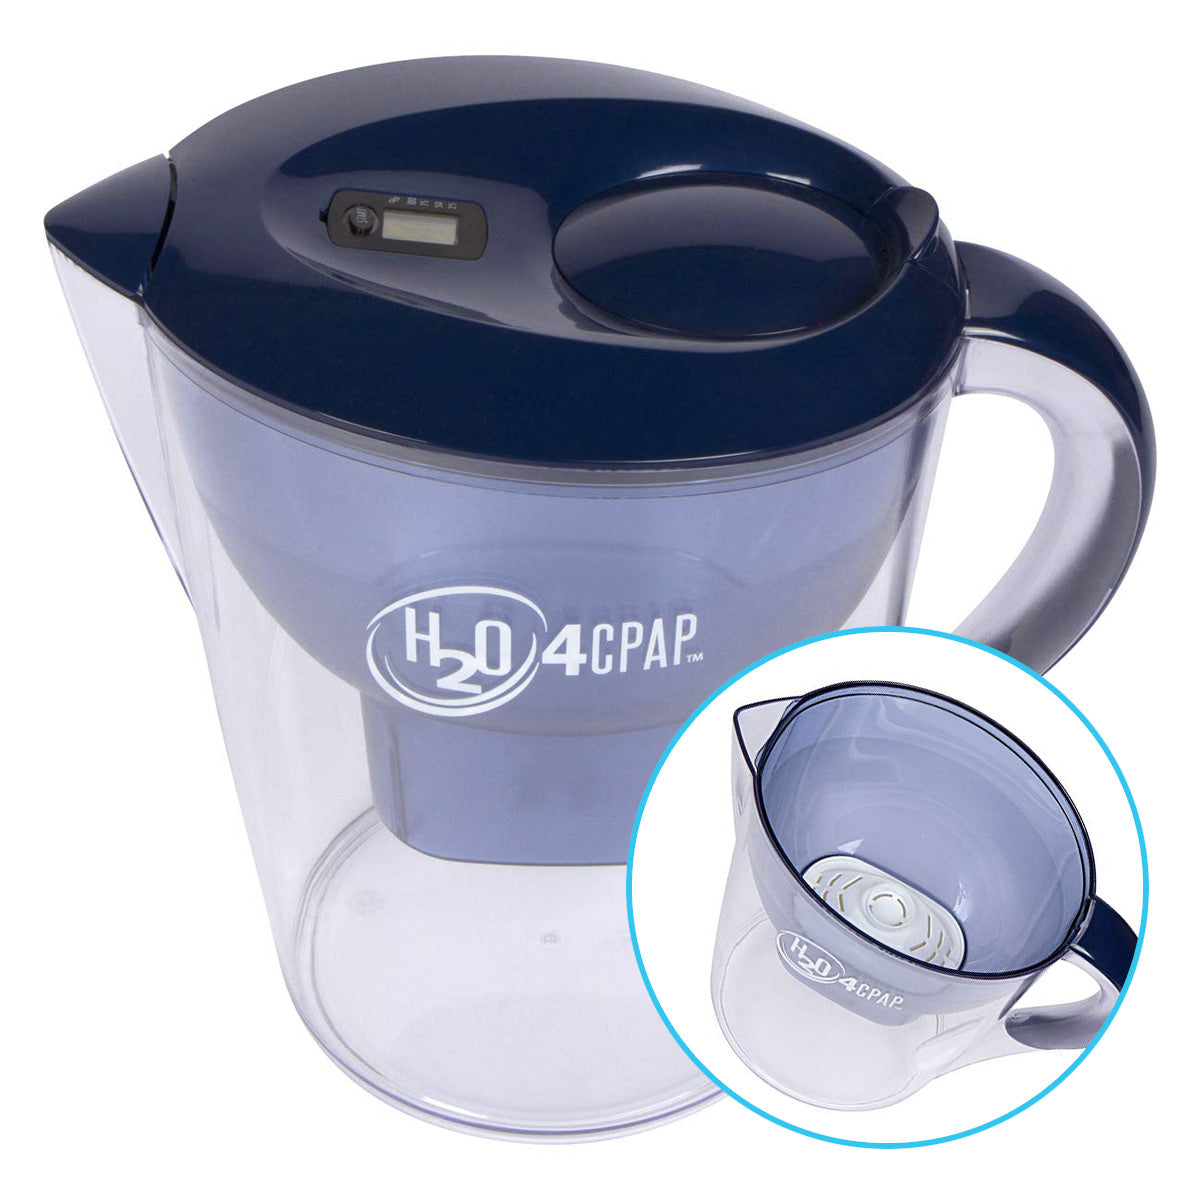 H2O 4 CPAP Distilled Water System